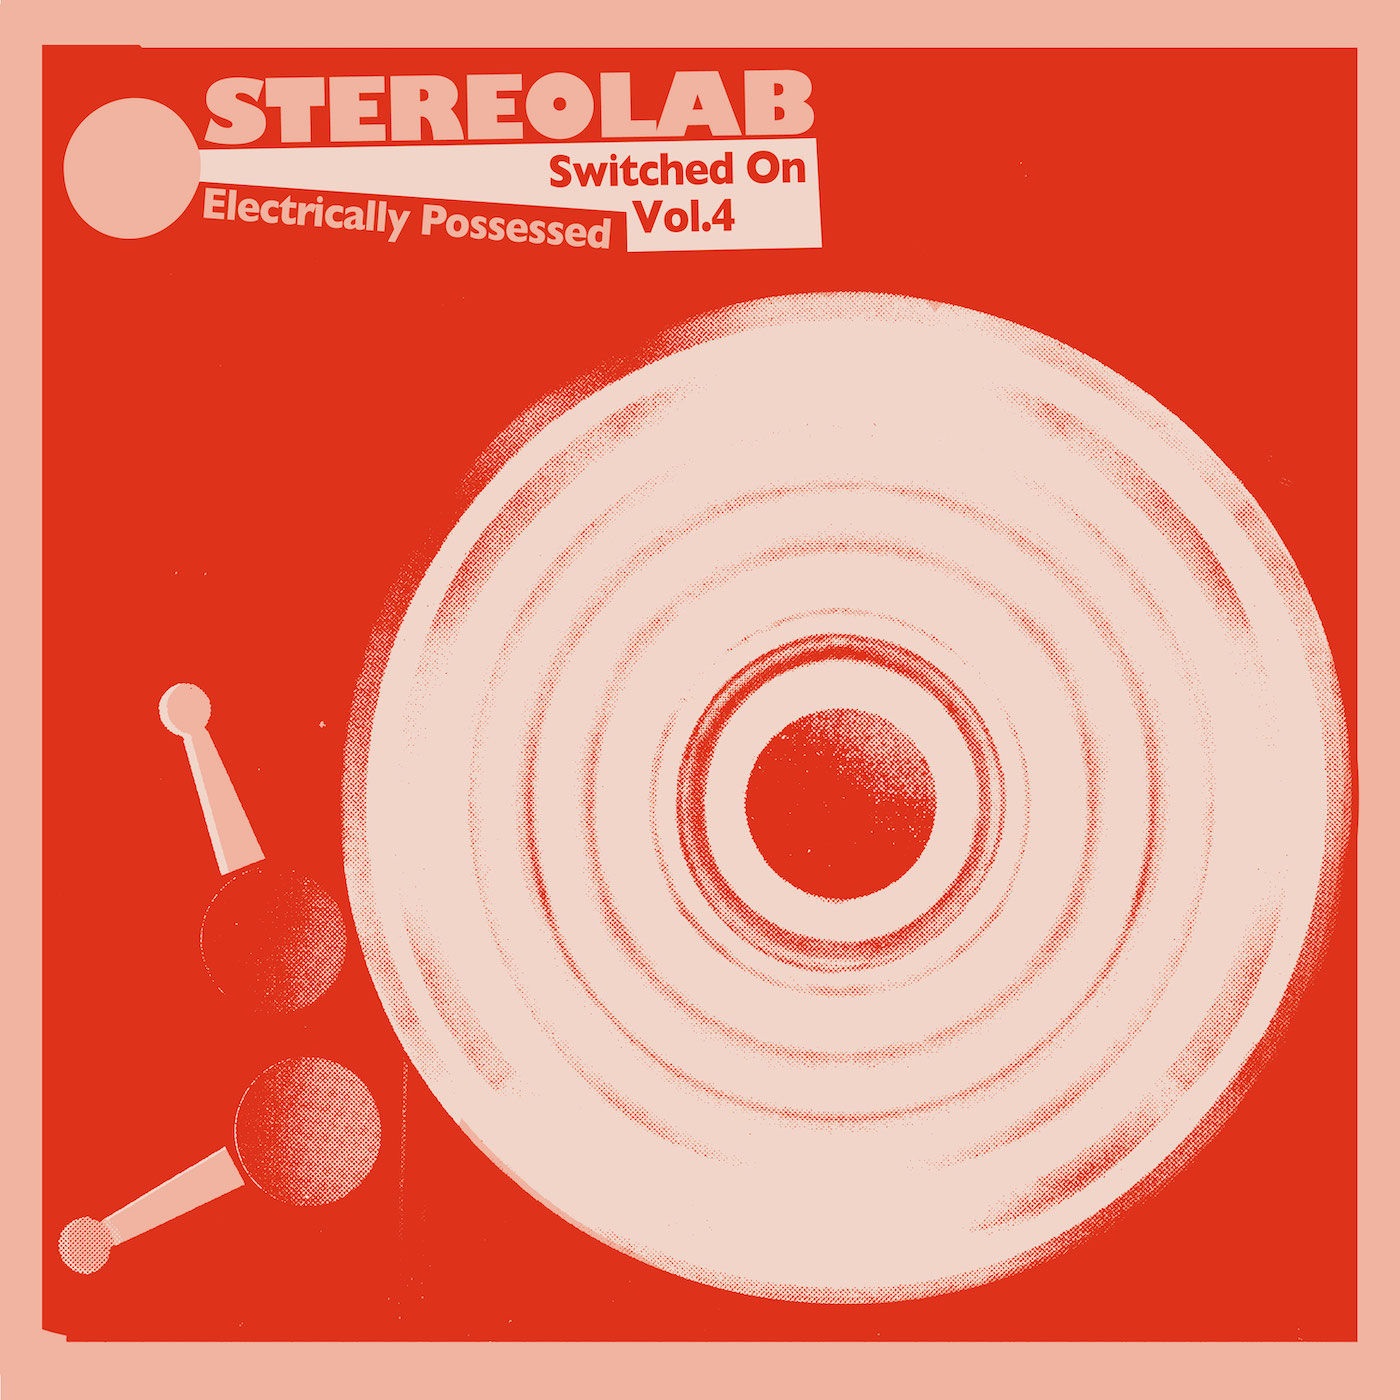 Stereolab - Electrically Possessed (Switched On, Vol. 4) (2021) [FLAC 24bit/96kHz]